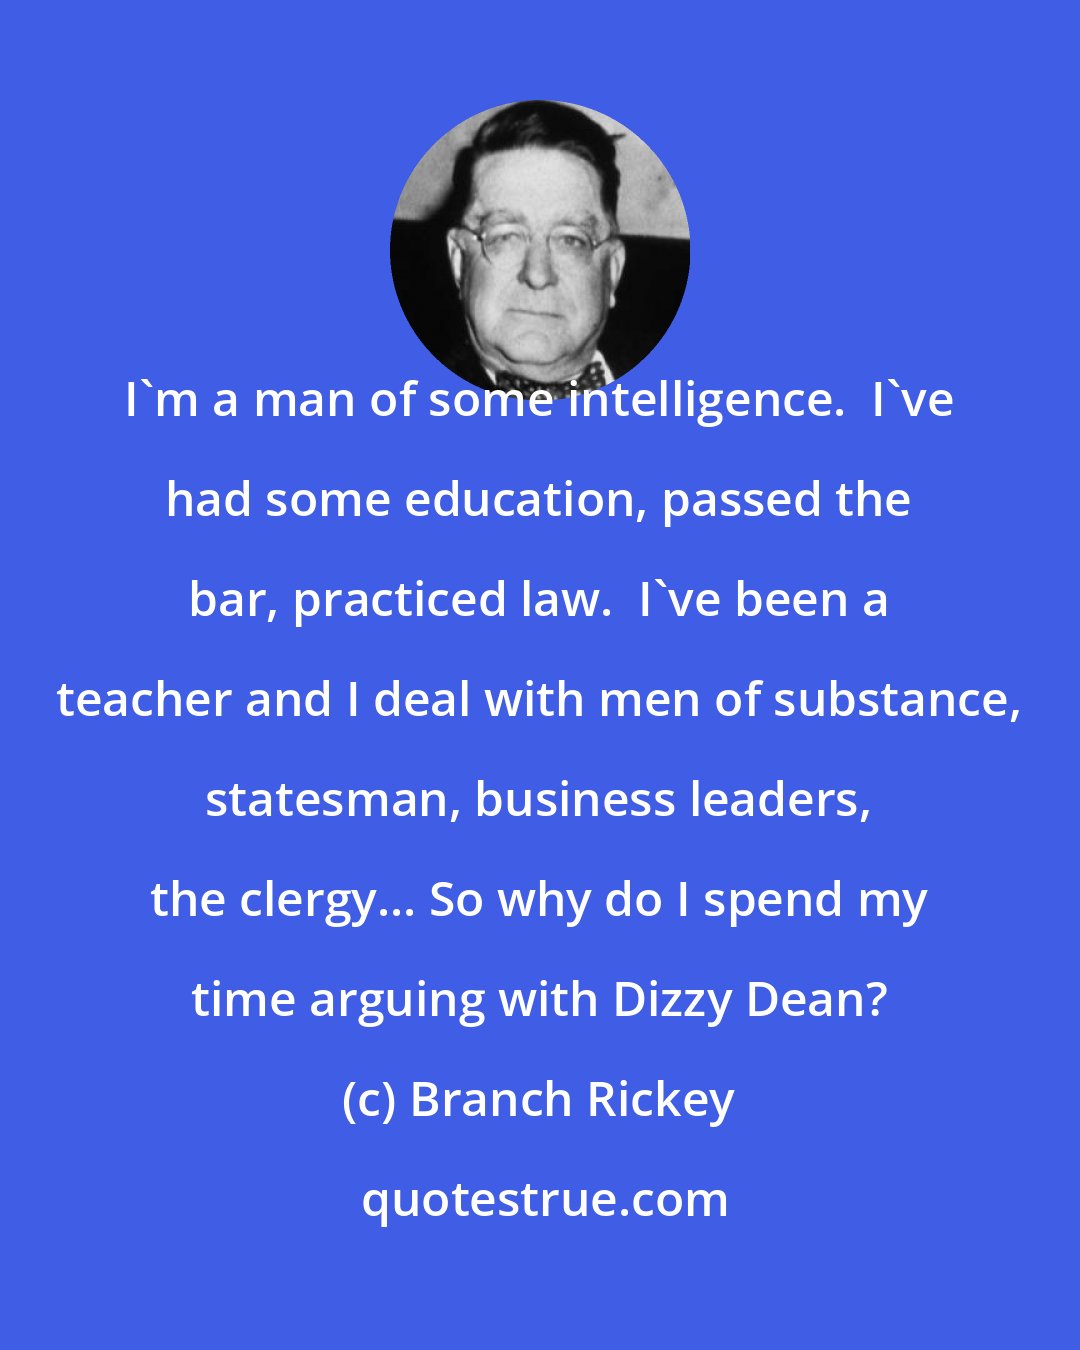 Branch Rickey: I'm a man of some intelligence.  I've had some education, passed the bar, practiced law.  I've been a teacher and I deal with men of substance, statesman, business leaders, the clergy... So why do I spend my time arguing with Dizzy Dean?